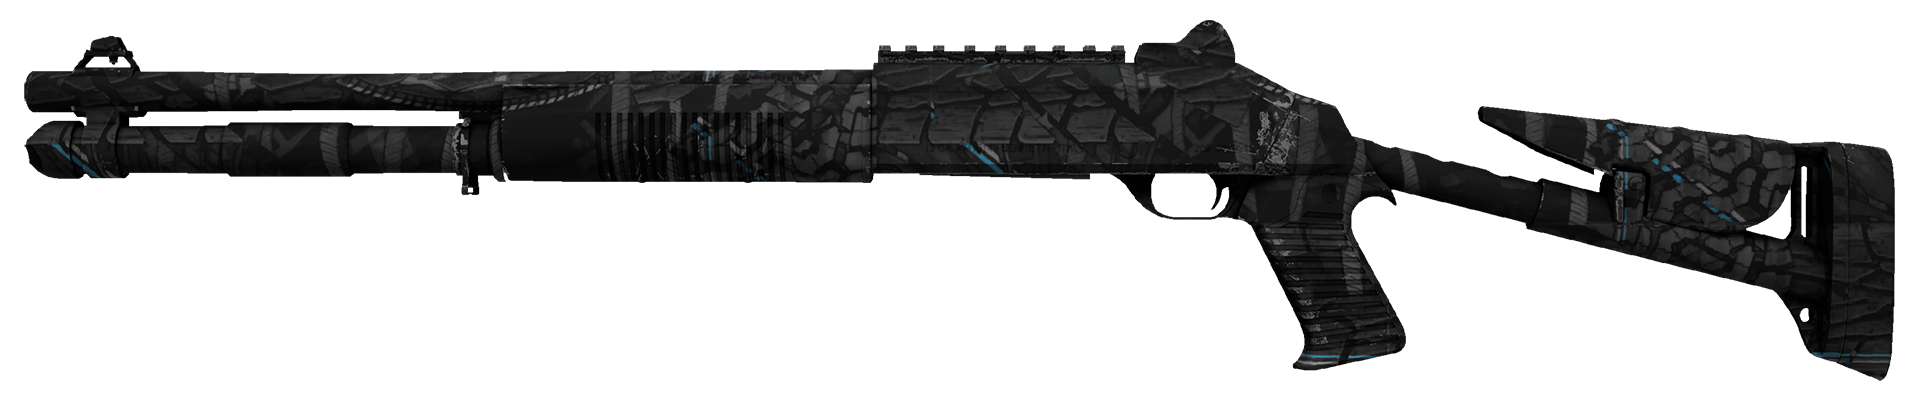 XM1014 Blue Tire Large Rendering